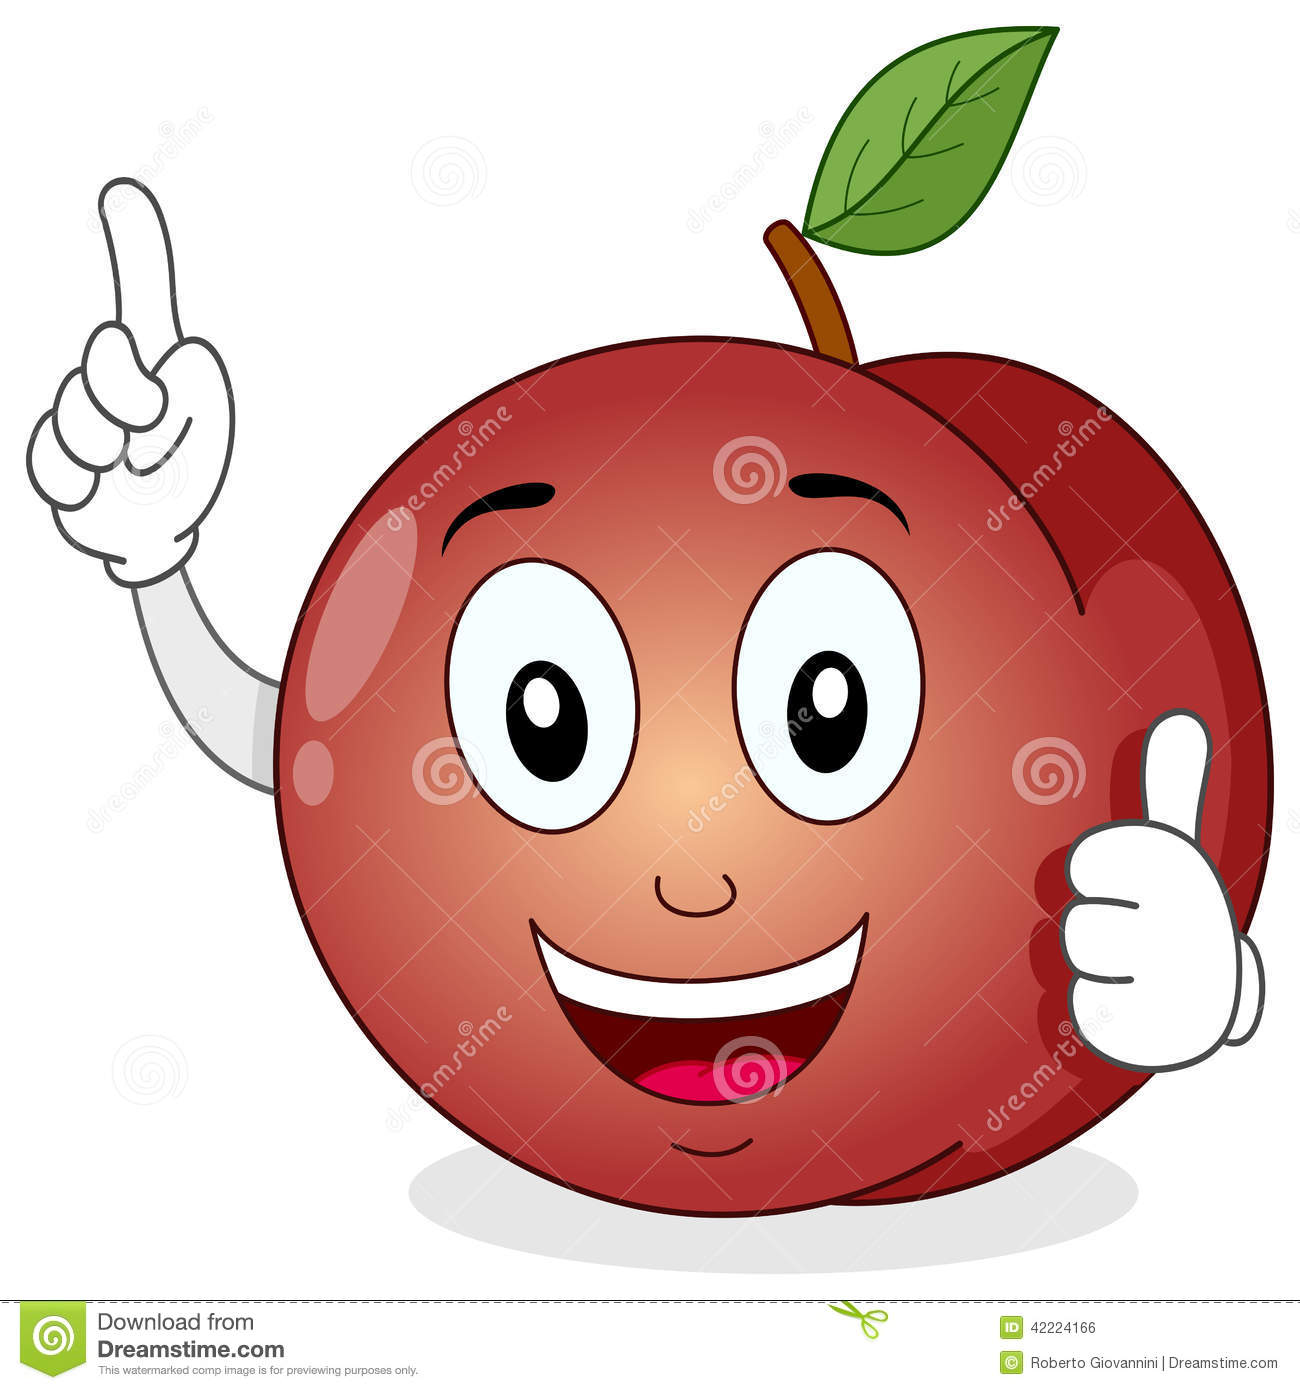 Funny Peach Cartoon Character Smiling Stock Vector   Image  42224166